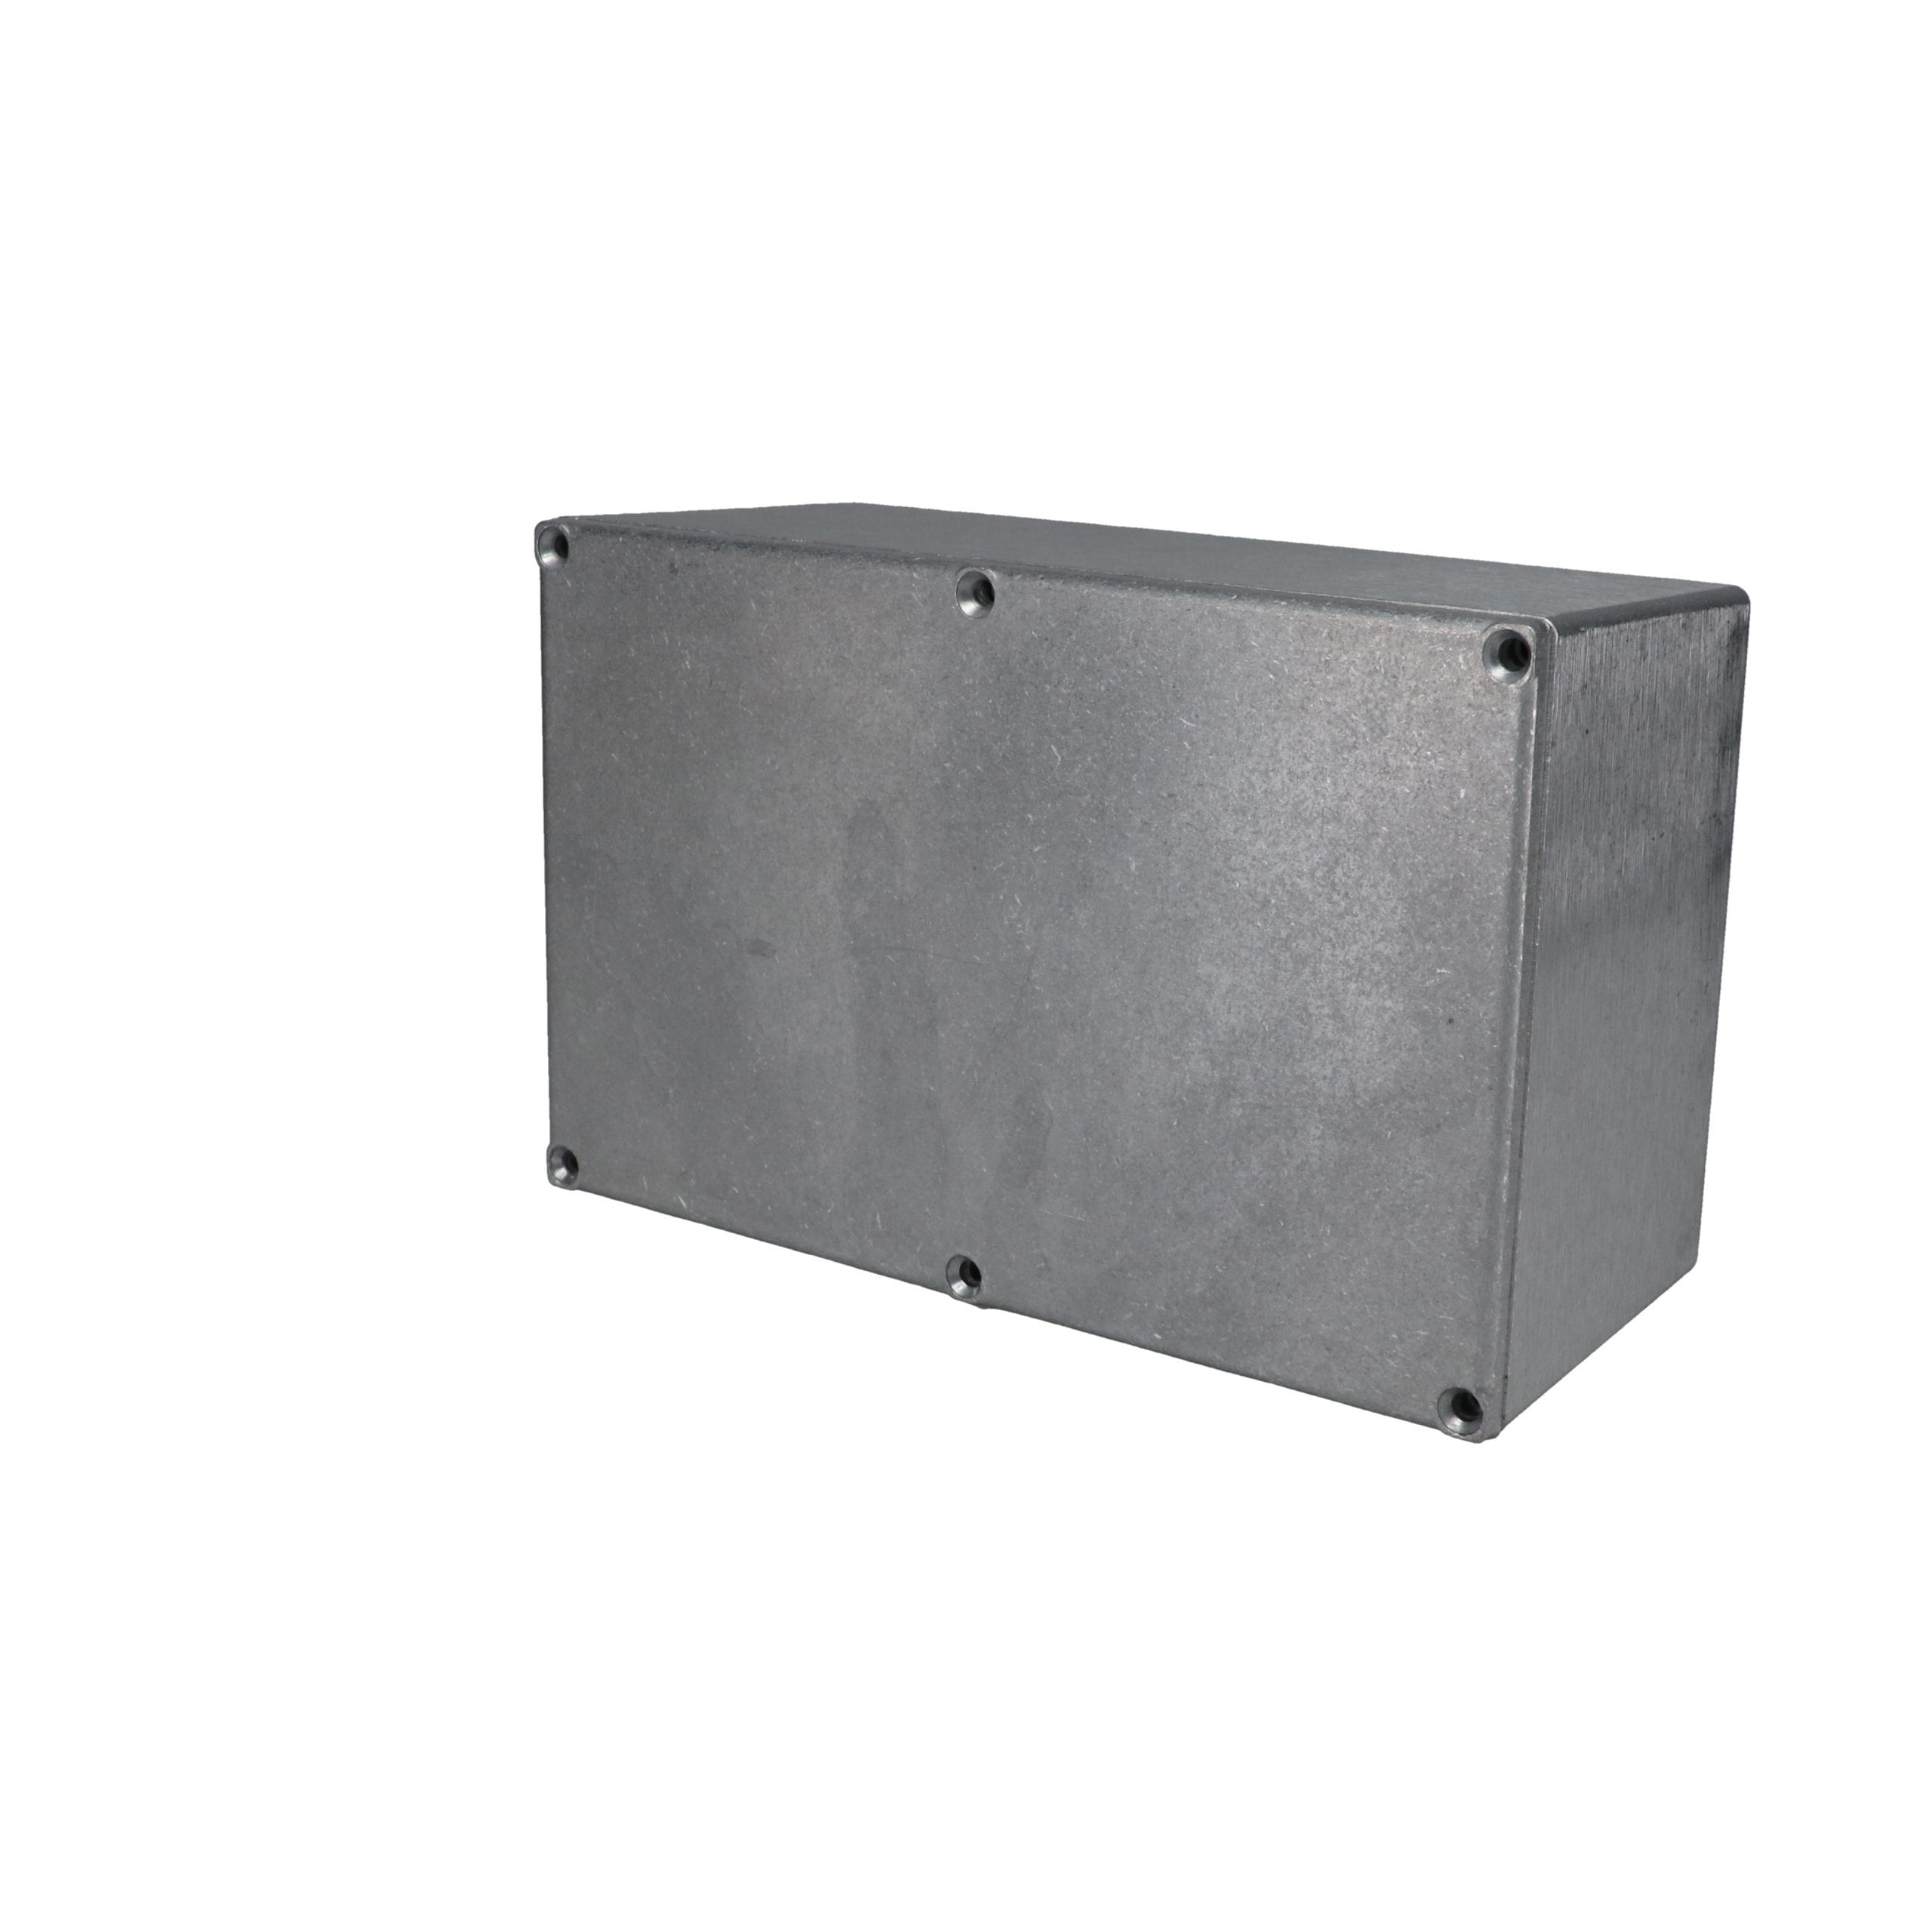 Corrosion Resistant ABS Electric Enclosure for Electronic Applications Conduit and Fittings BUD Industries CU-477 Aluminum Econobox 